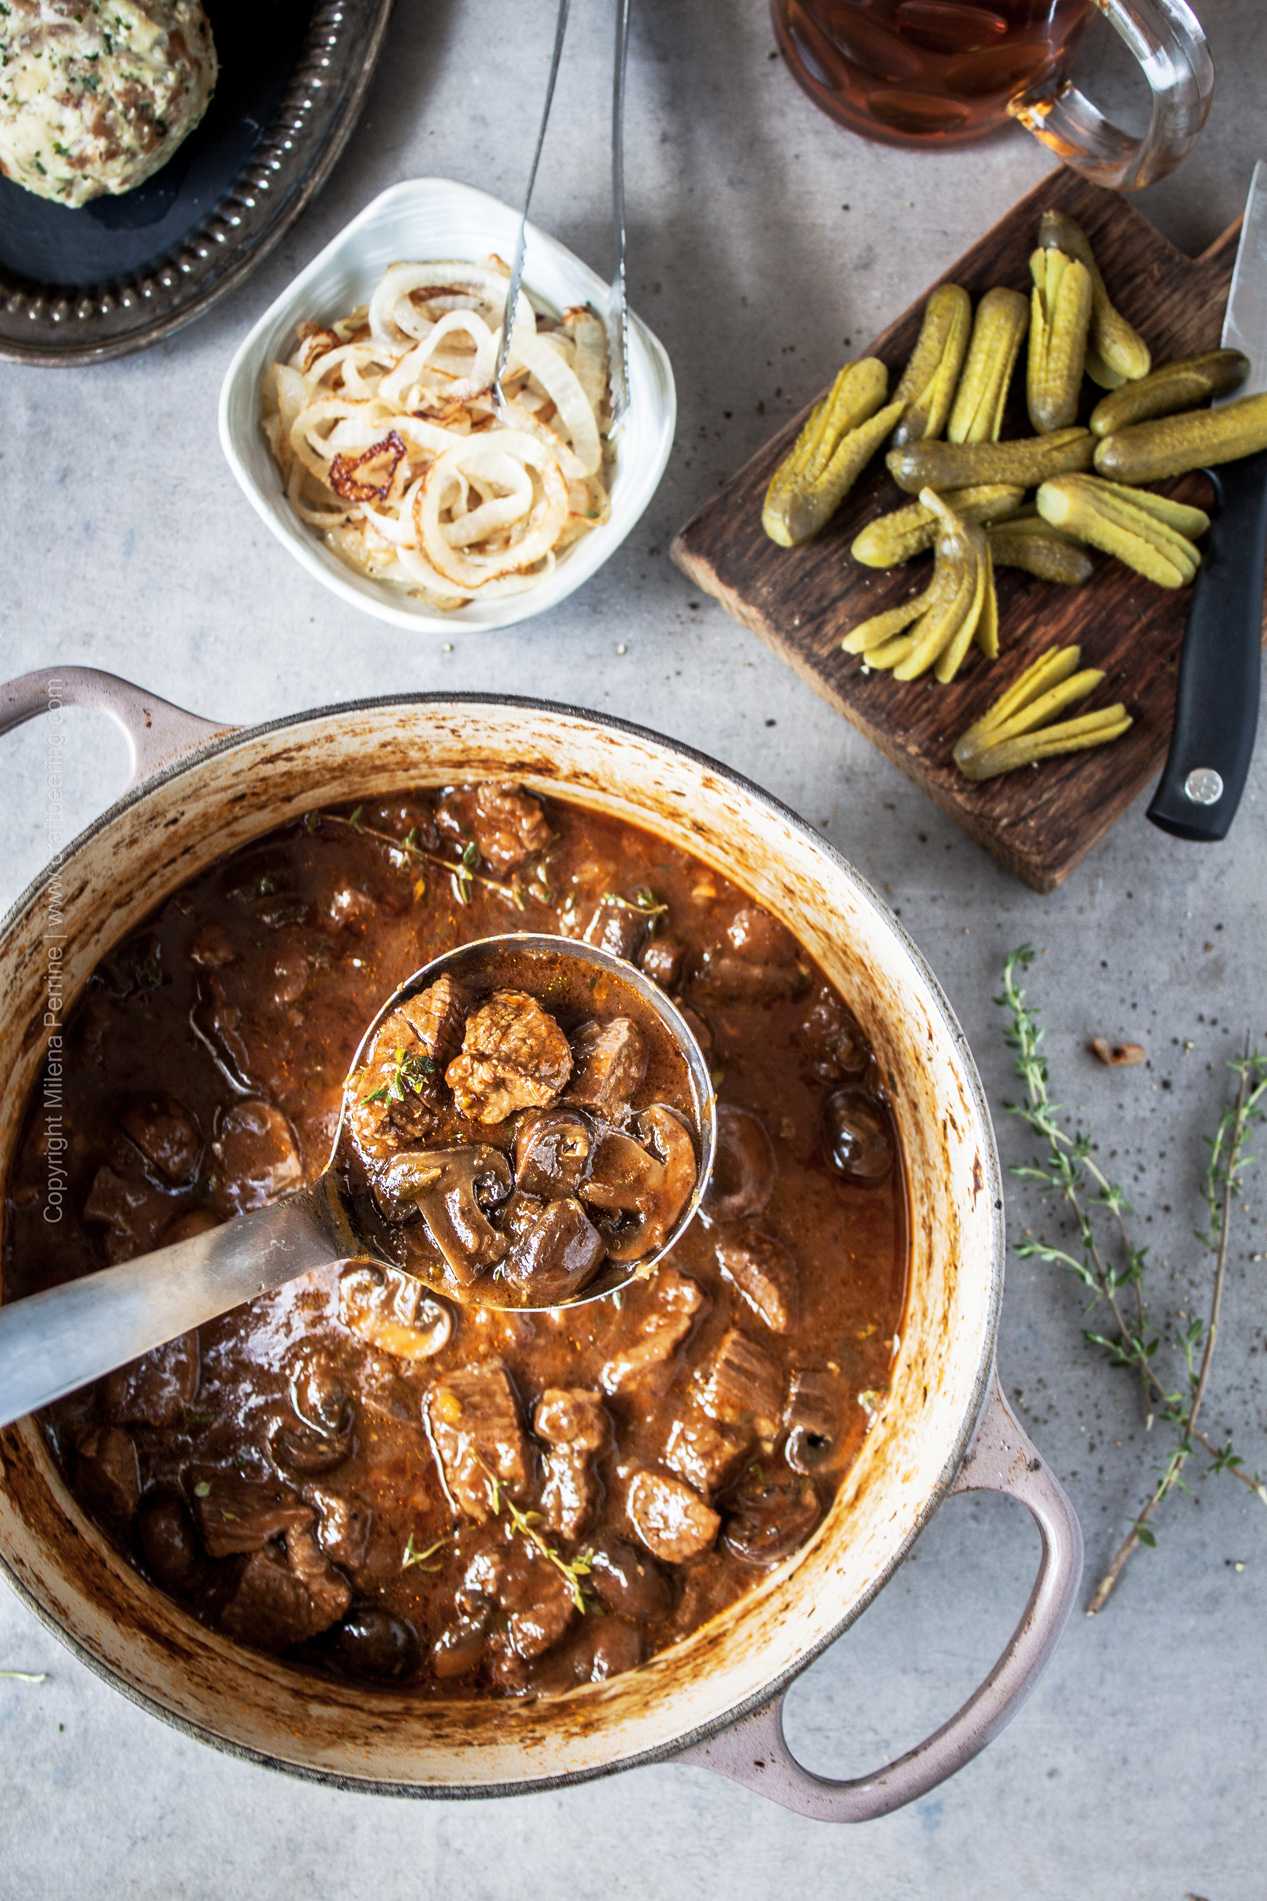 Brisket beef stew with mushrooms and black lager, known as Bierfleisch - a Bavarian classic.